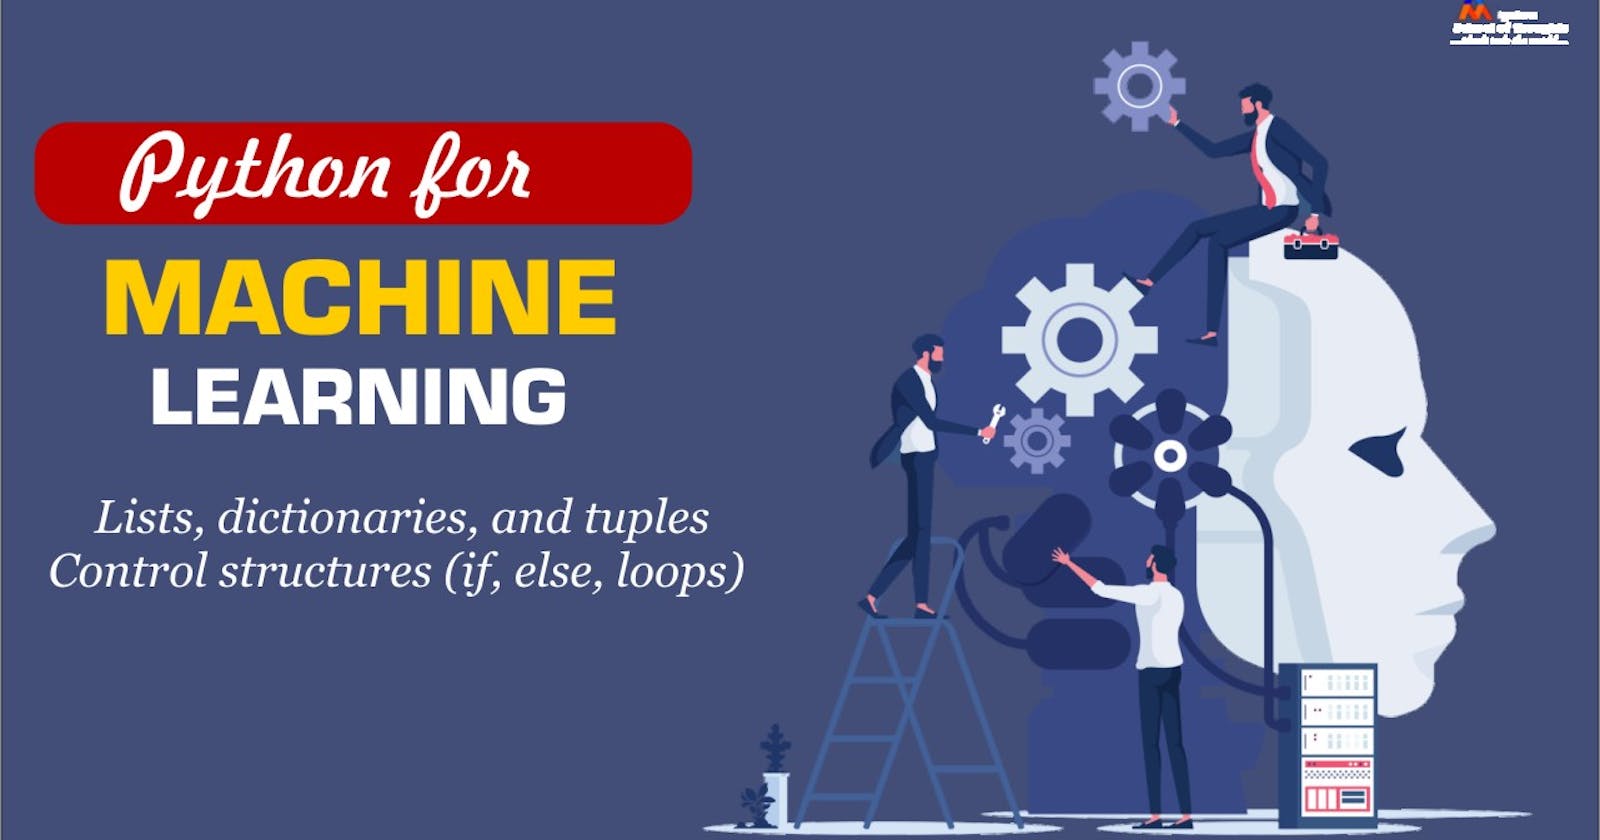 Python for Machine Learning